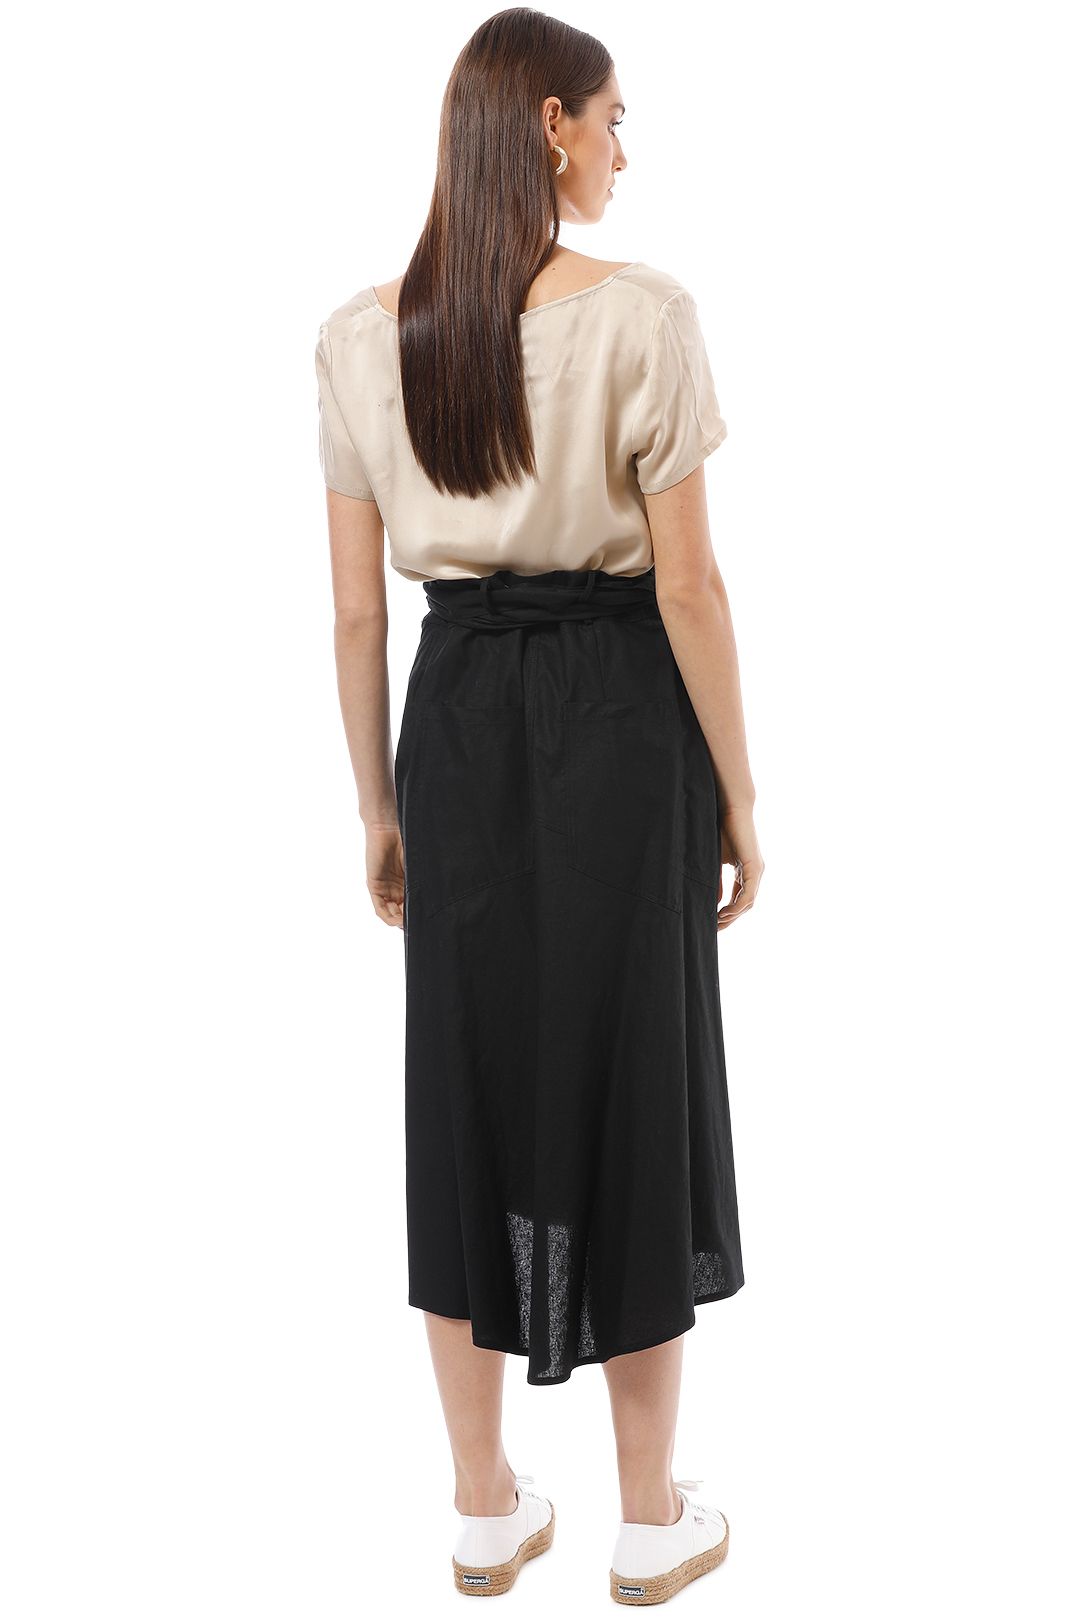 AKIN by Ginger and Smart - Grace Wrap Skirt - Black - Back